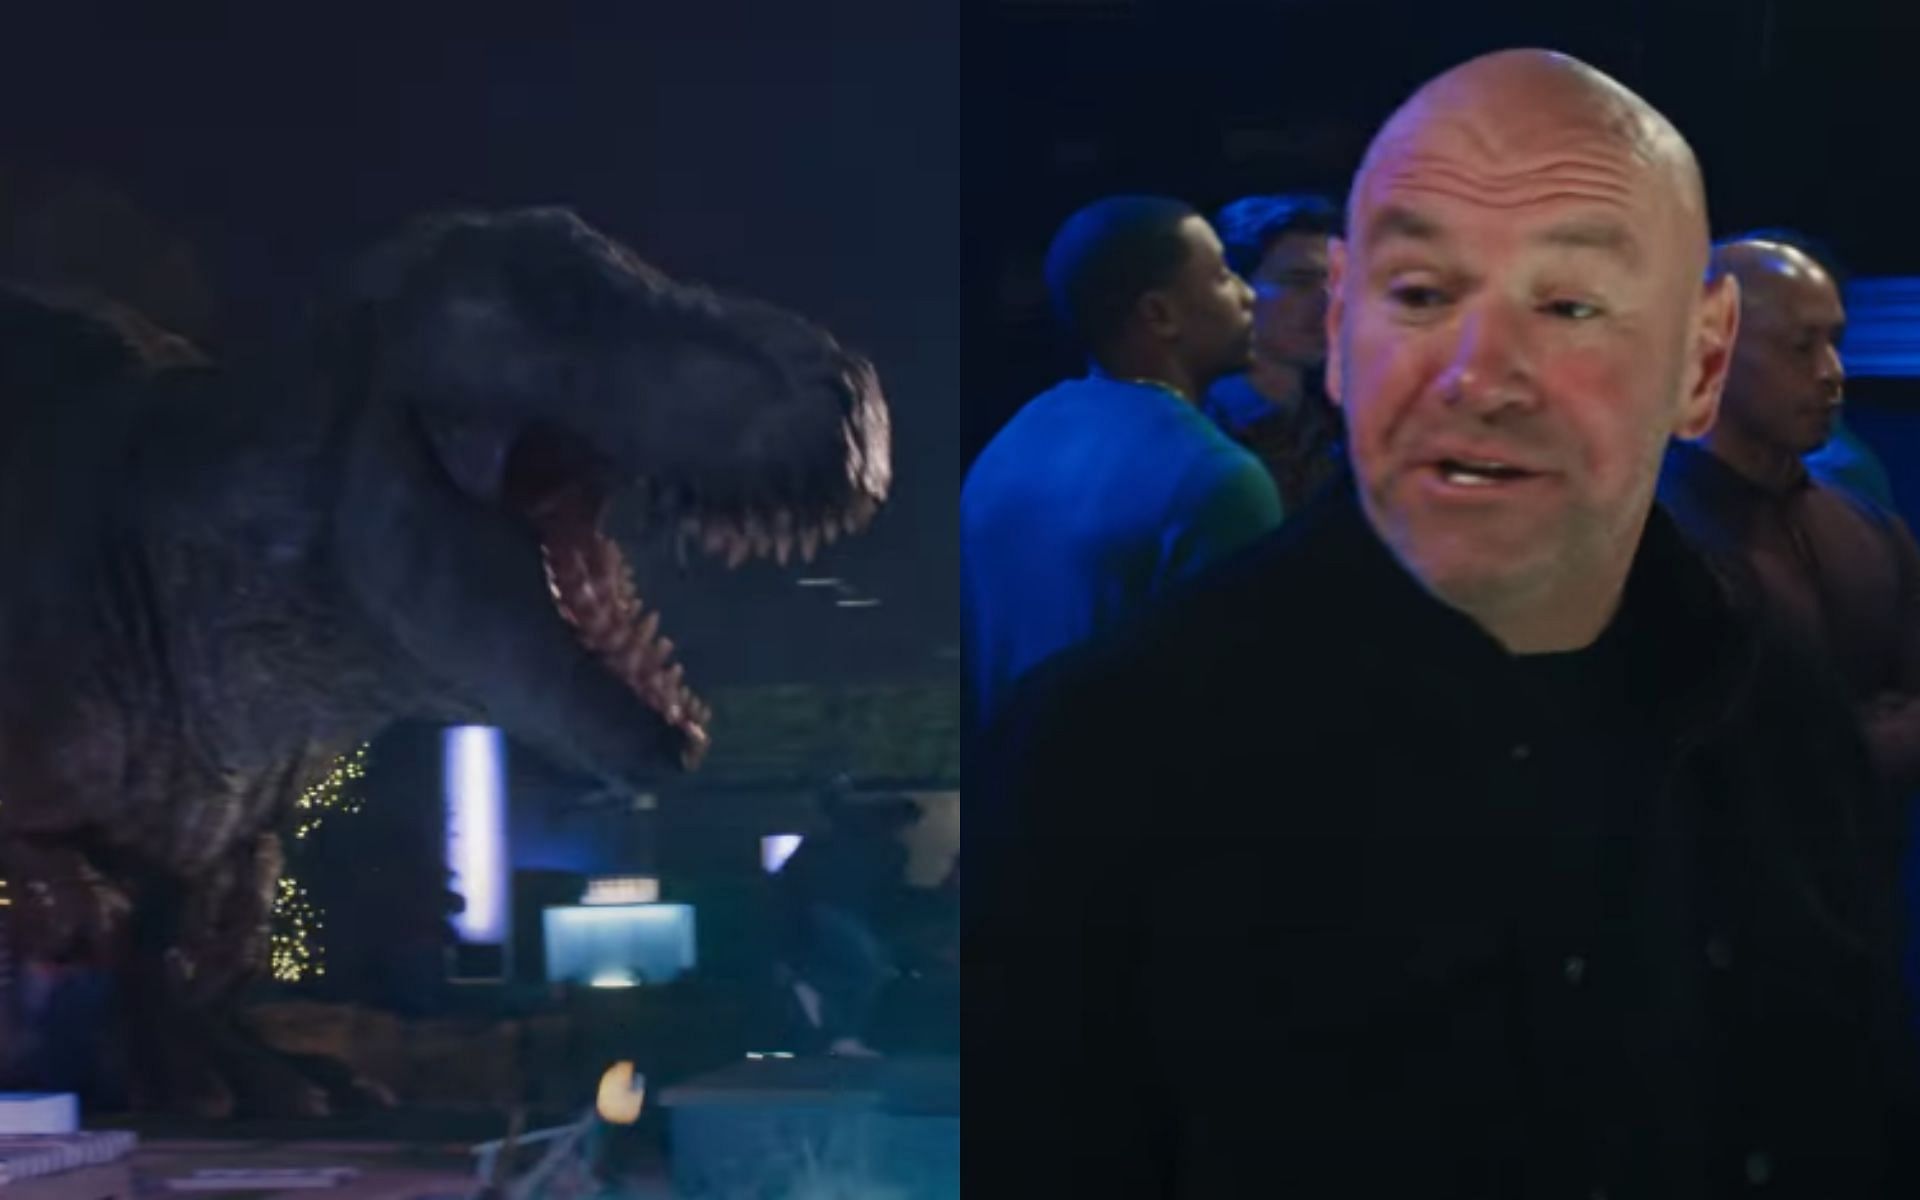 Bud Light leaked their Super Bowl commercial [Pictured] featuring UFC CEO Dana White [Image courtesy: Bud Light - YouTube]